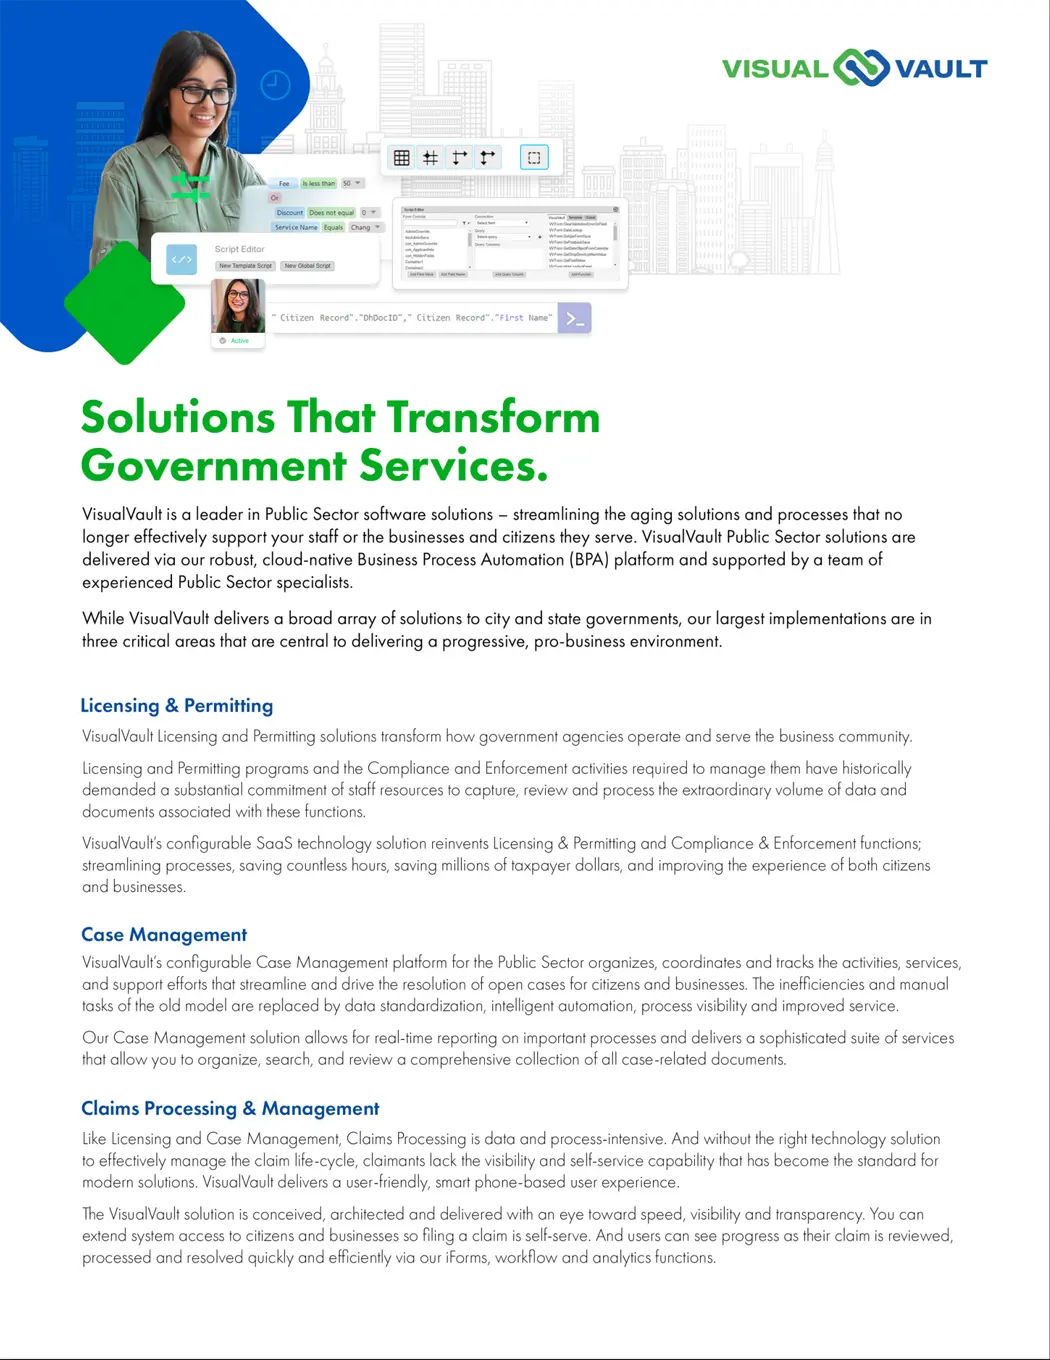 Solutions That Transform Government Services